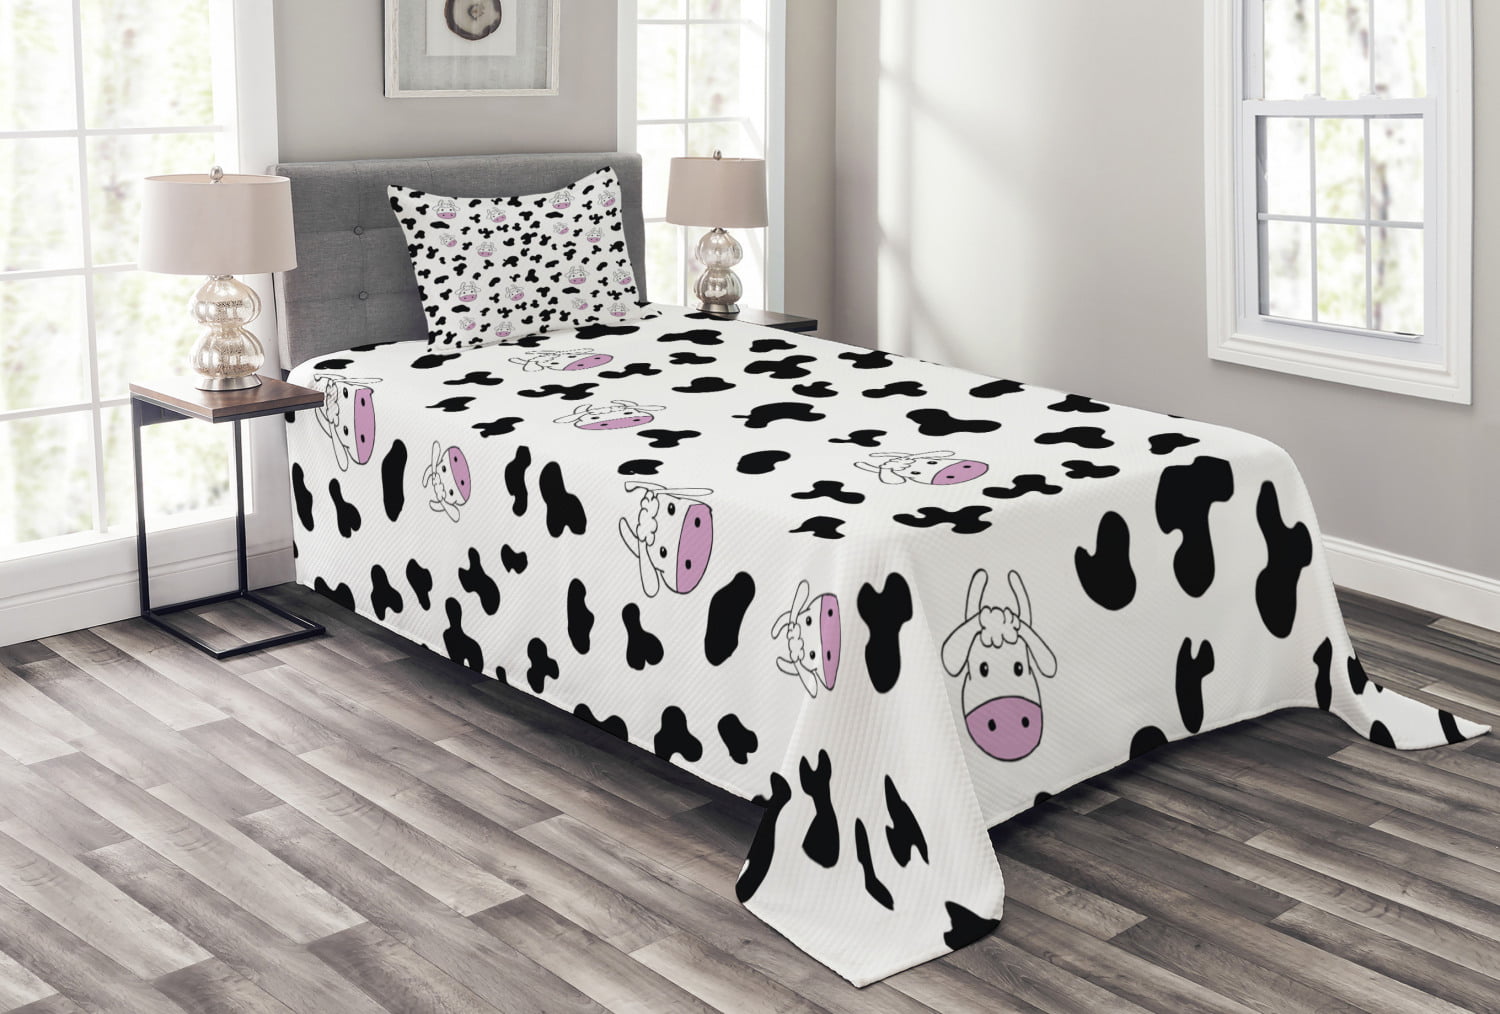 Queen Size Ambesonne Cow Print Duvet Cover Set Decorative 3 Piece Bedding Set with 2 Pillow Shams Animal Cow Hide Pattern Doodle Cartoon Drawing Farming Husbandry Black